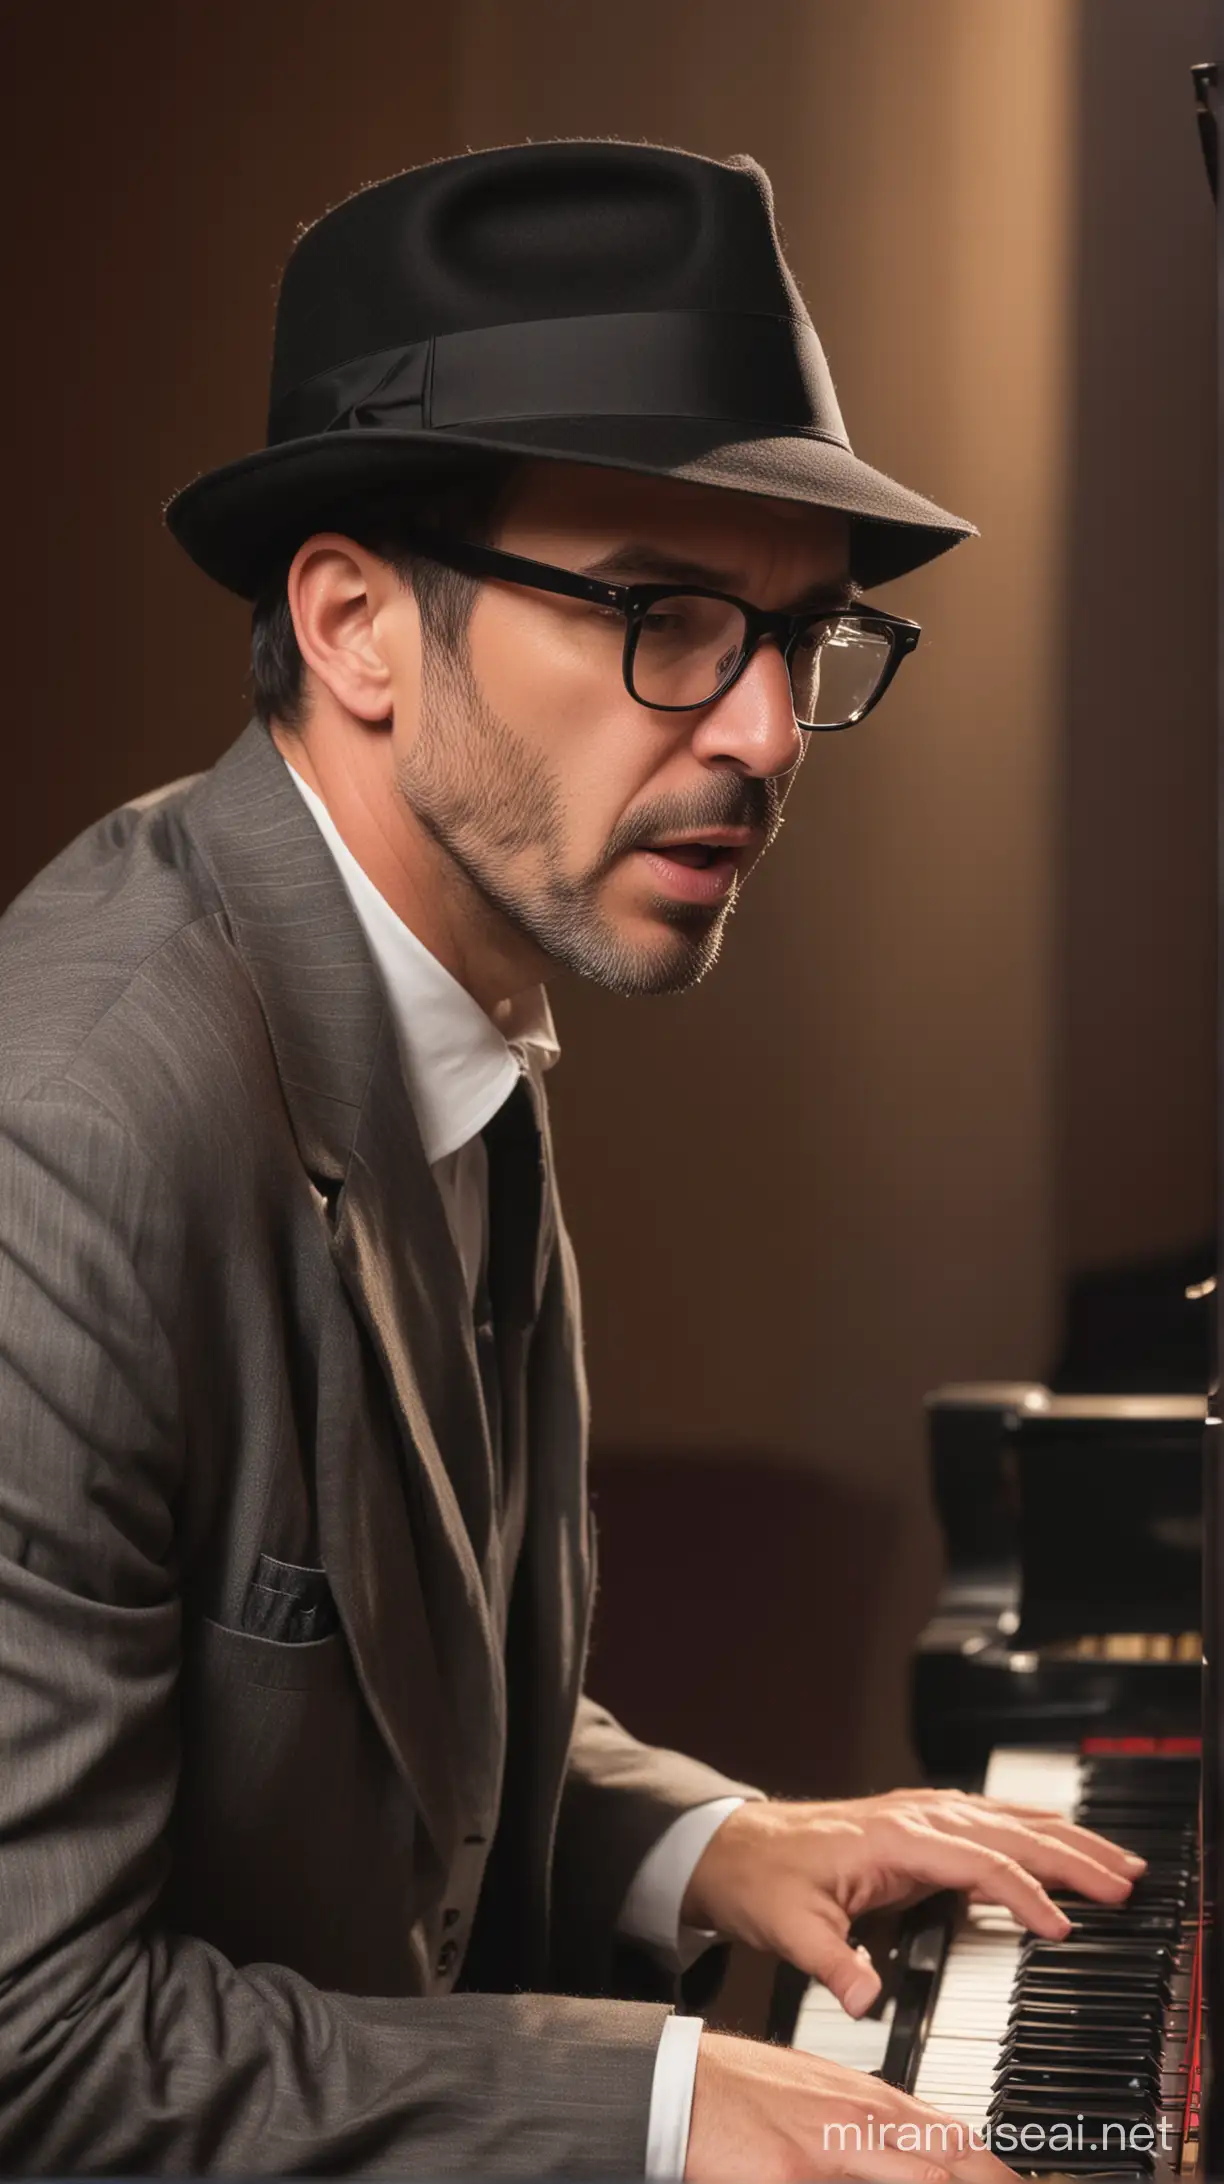 46 year old man, wearing glasses, wearing a fedora hat, playing the grand piano while singing sadly, facing the audience in front.